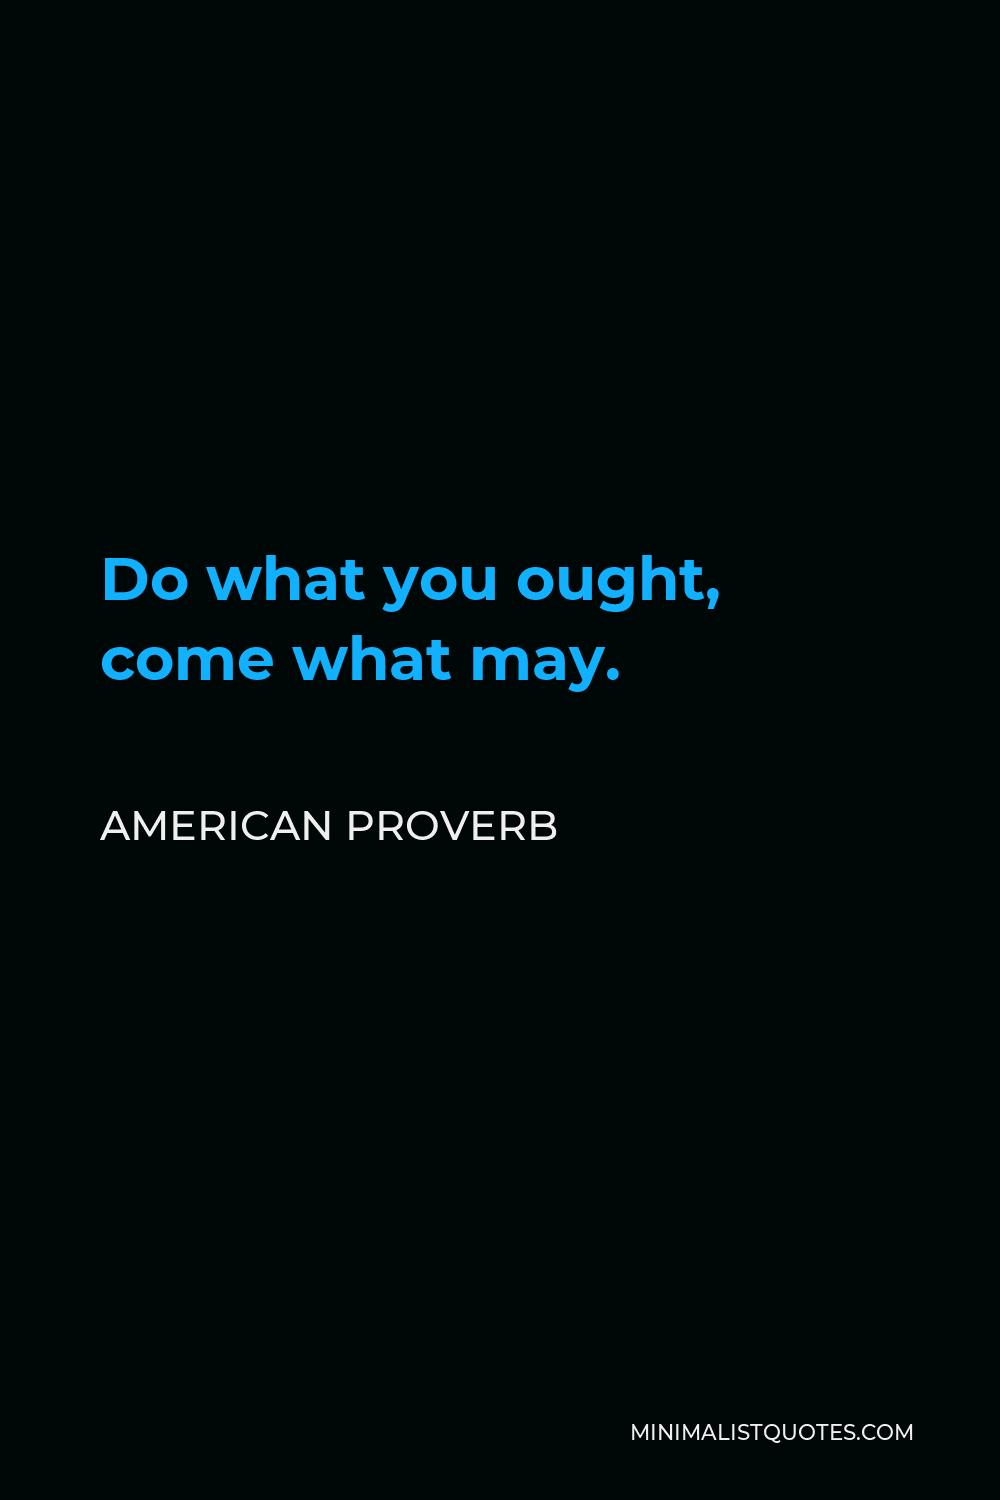 American Proverb Quote - Do what you ought, come what may.